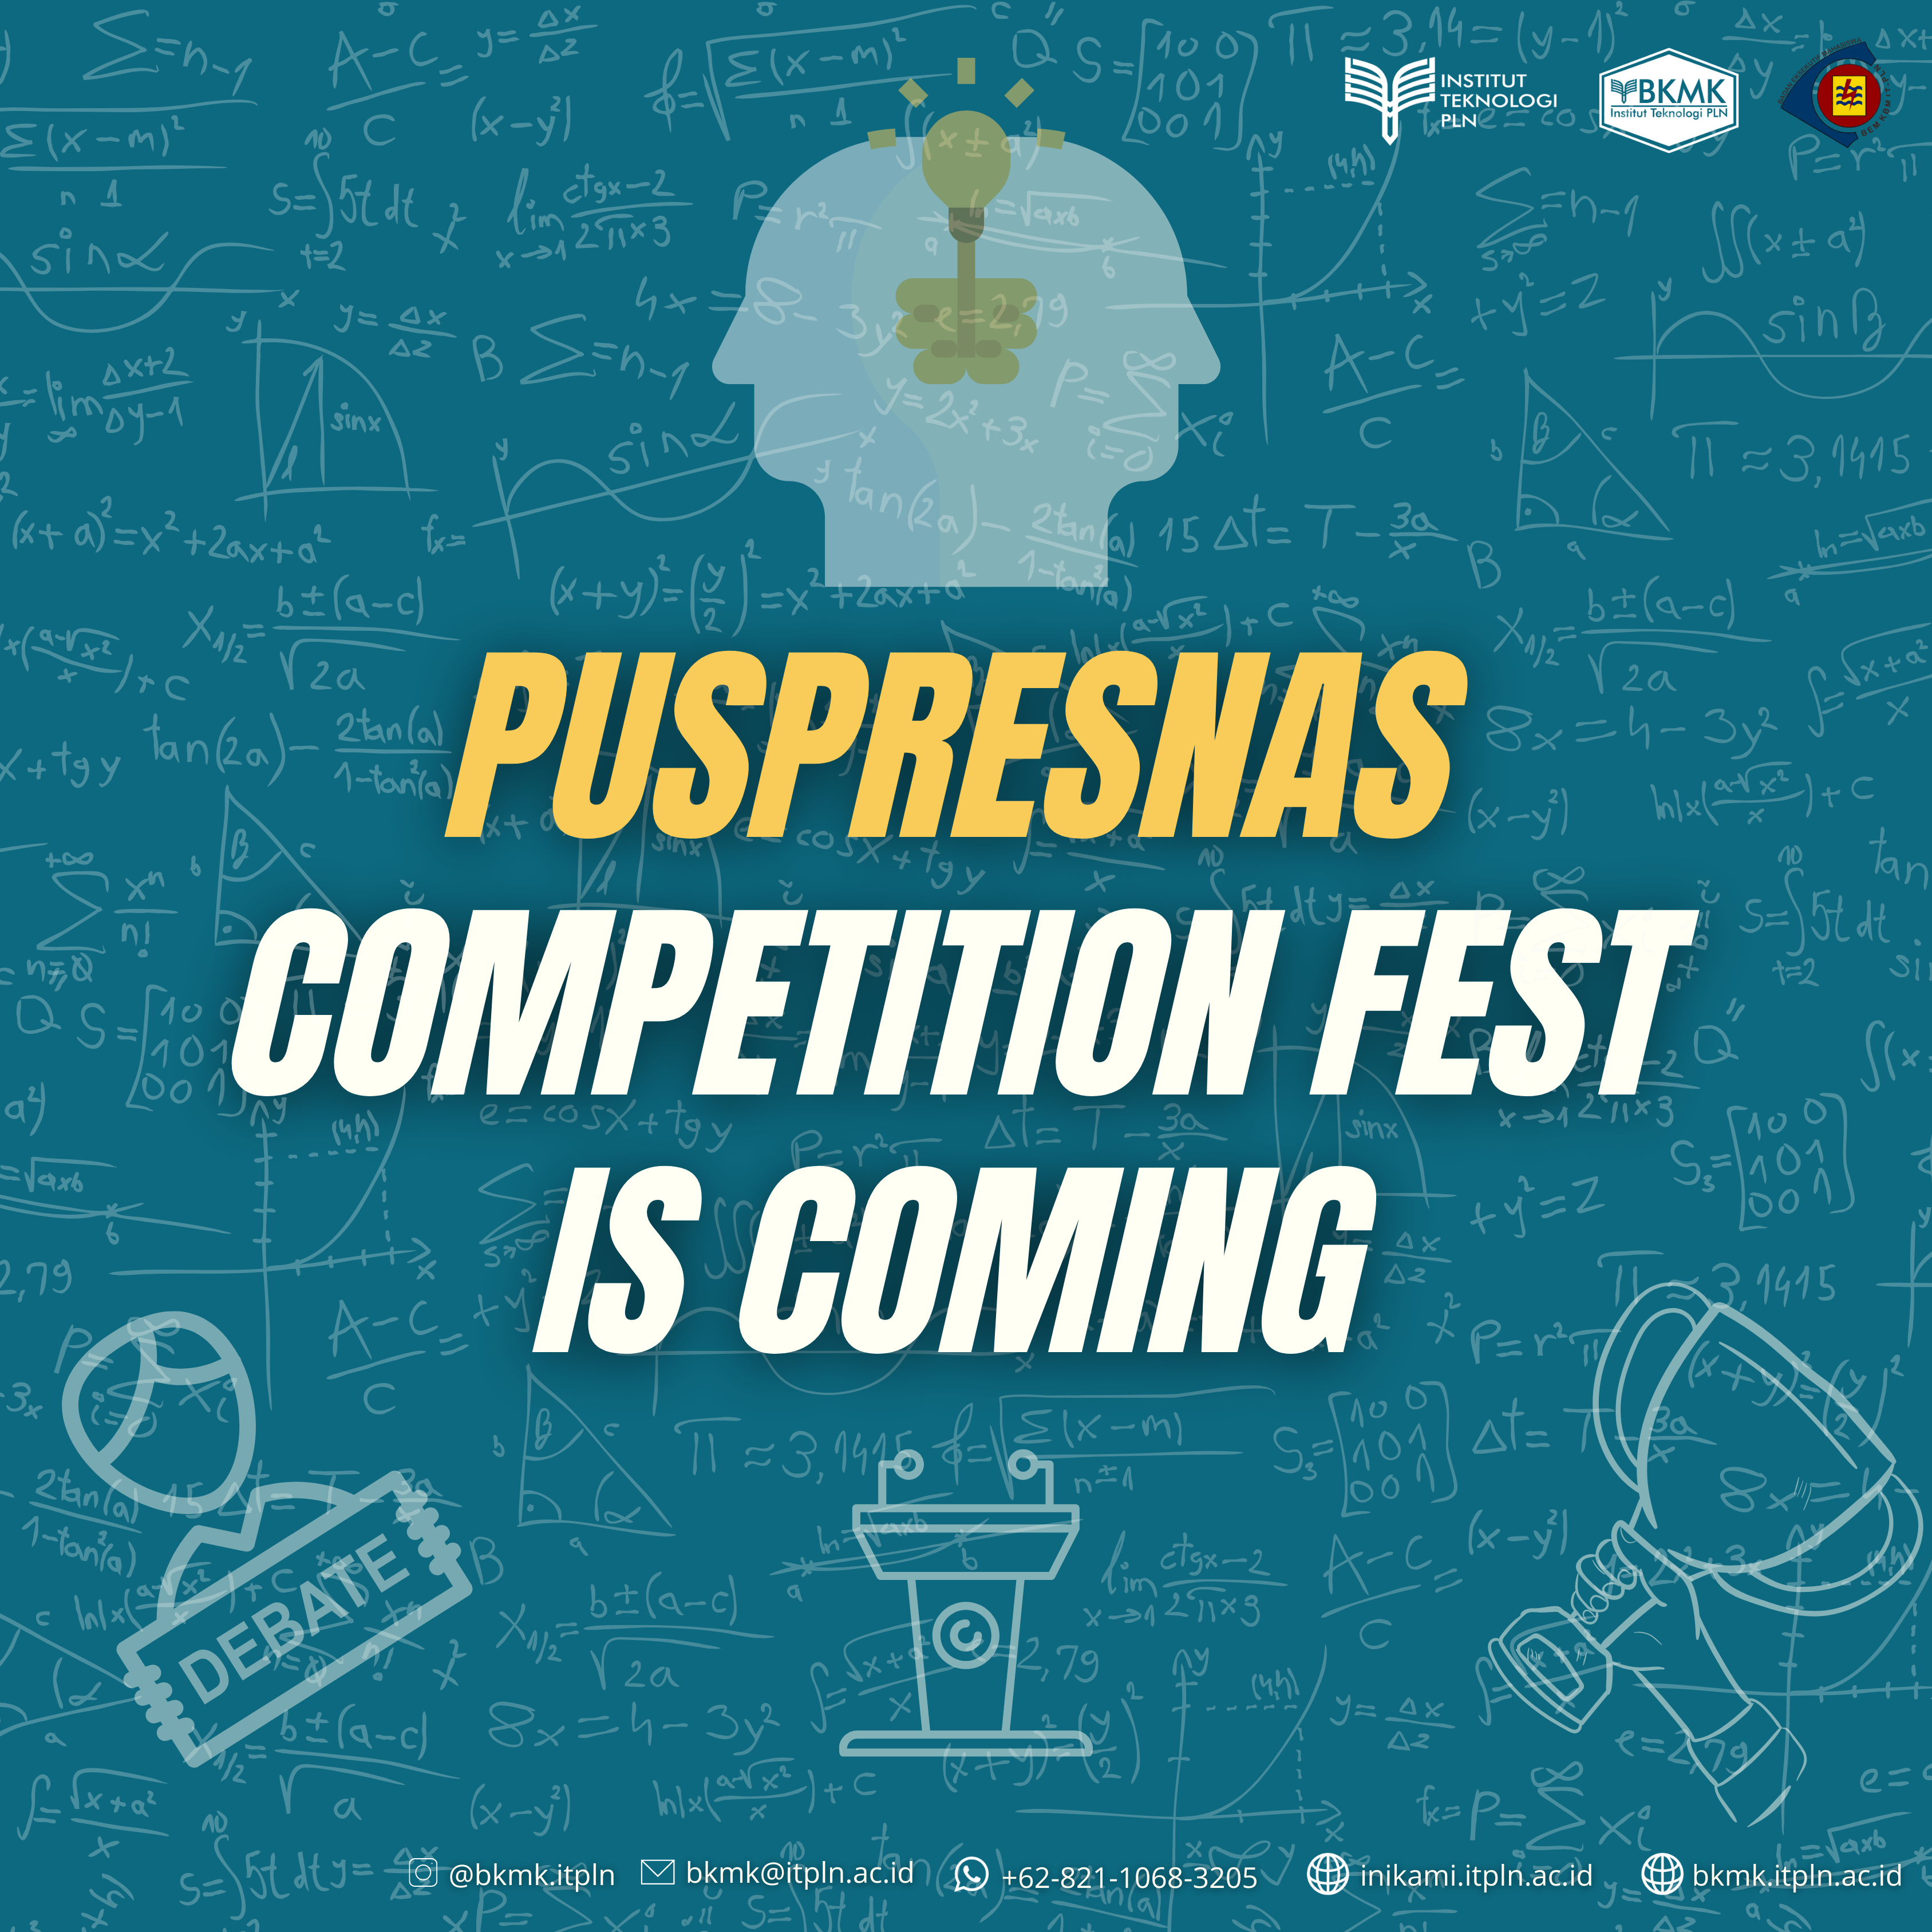 PUSPRESNAS COMPETITION FEST